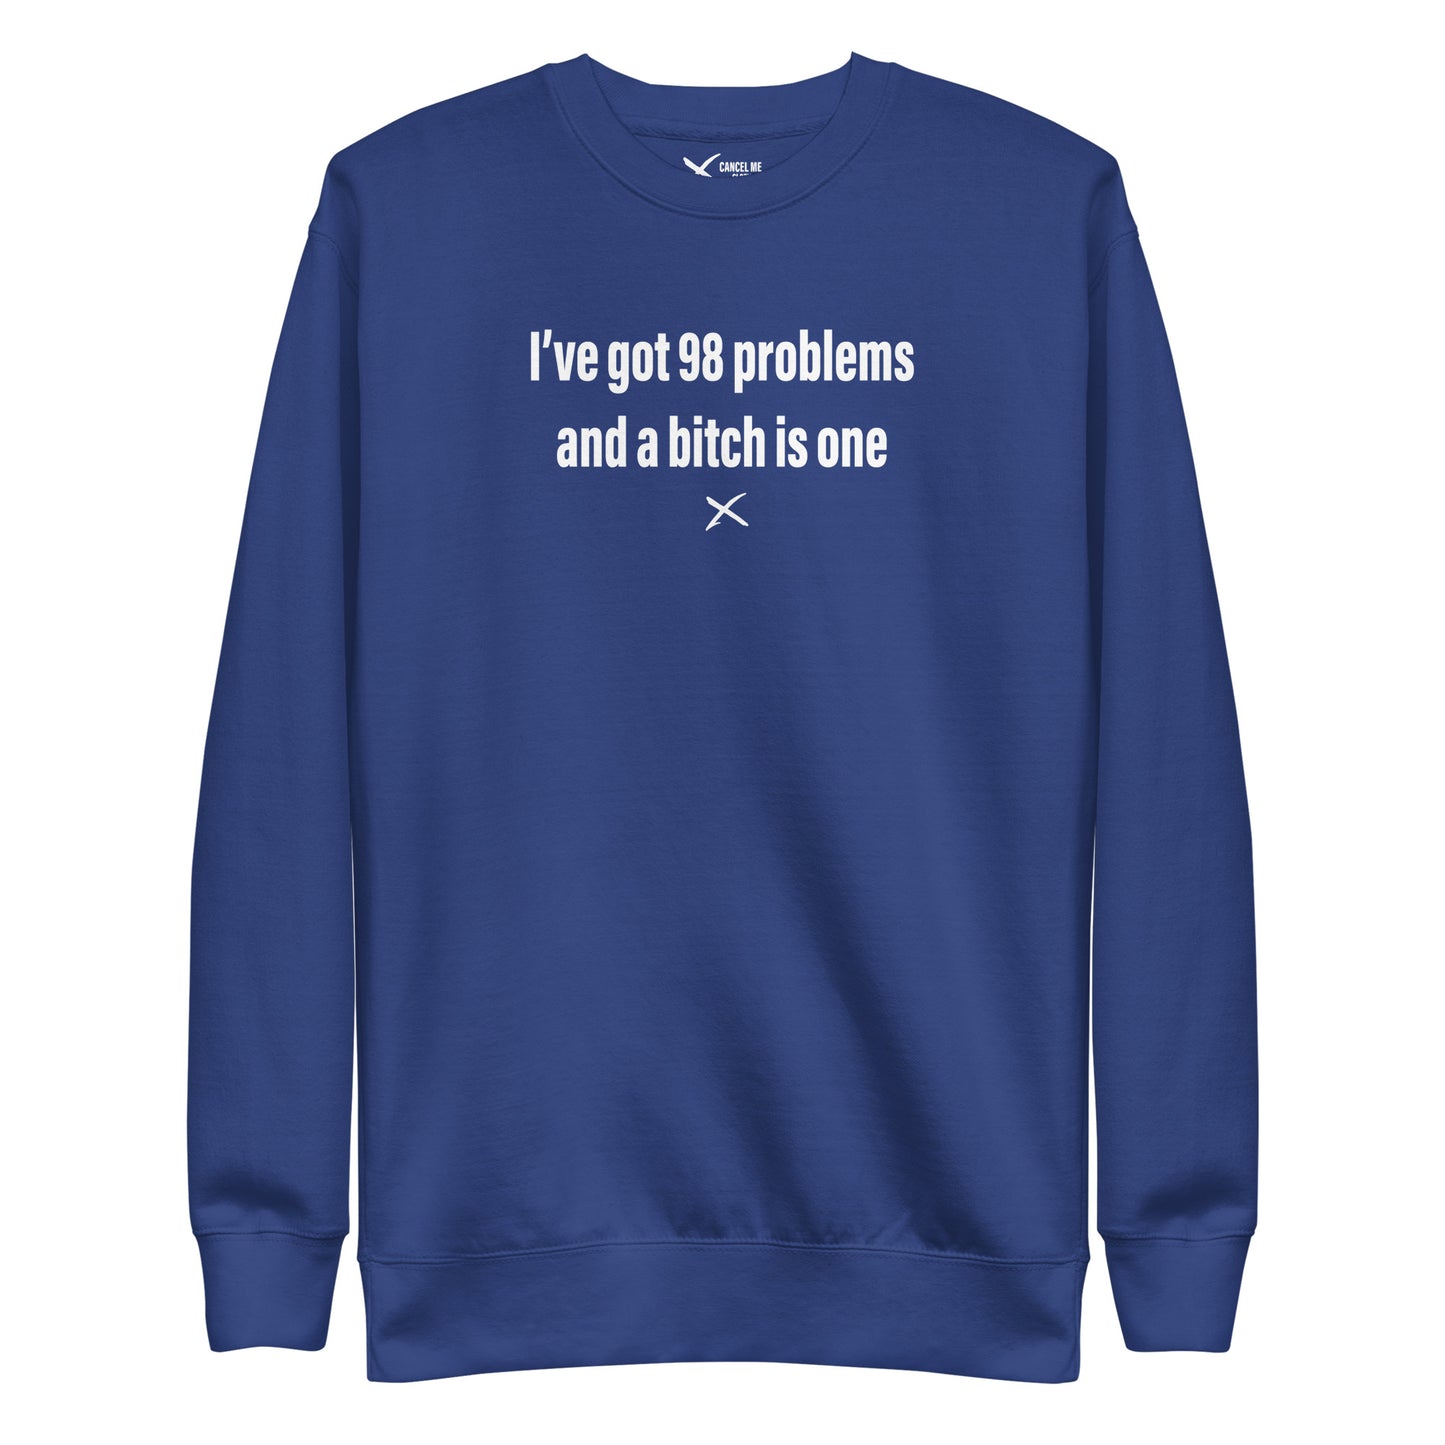 I've got 98 problems and a bitch is one - Sweatshirt